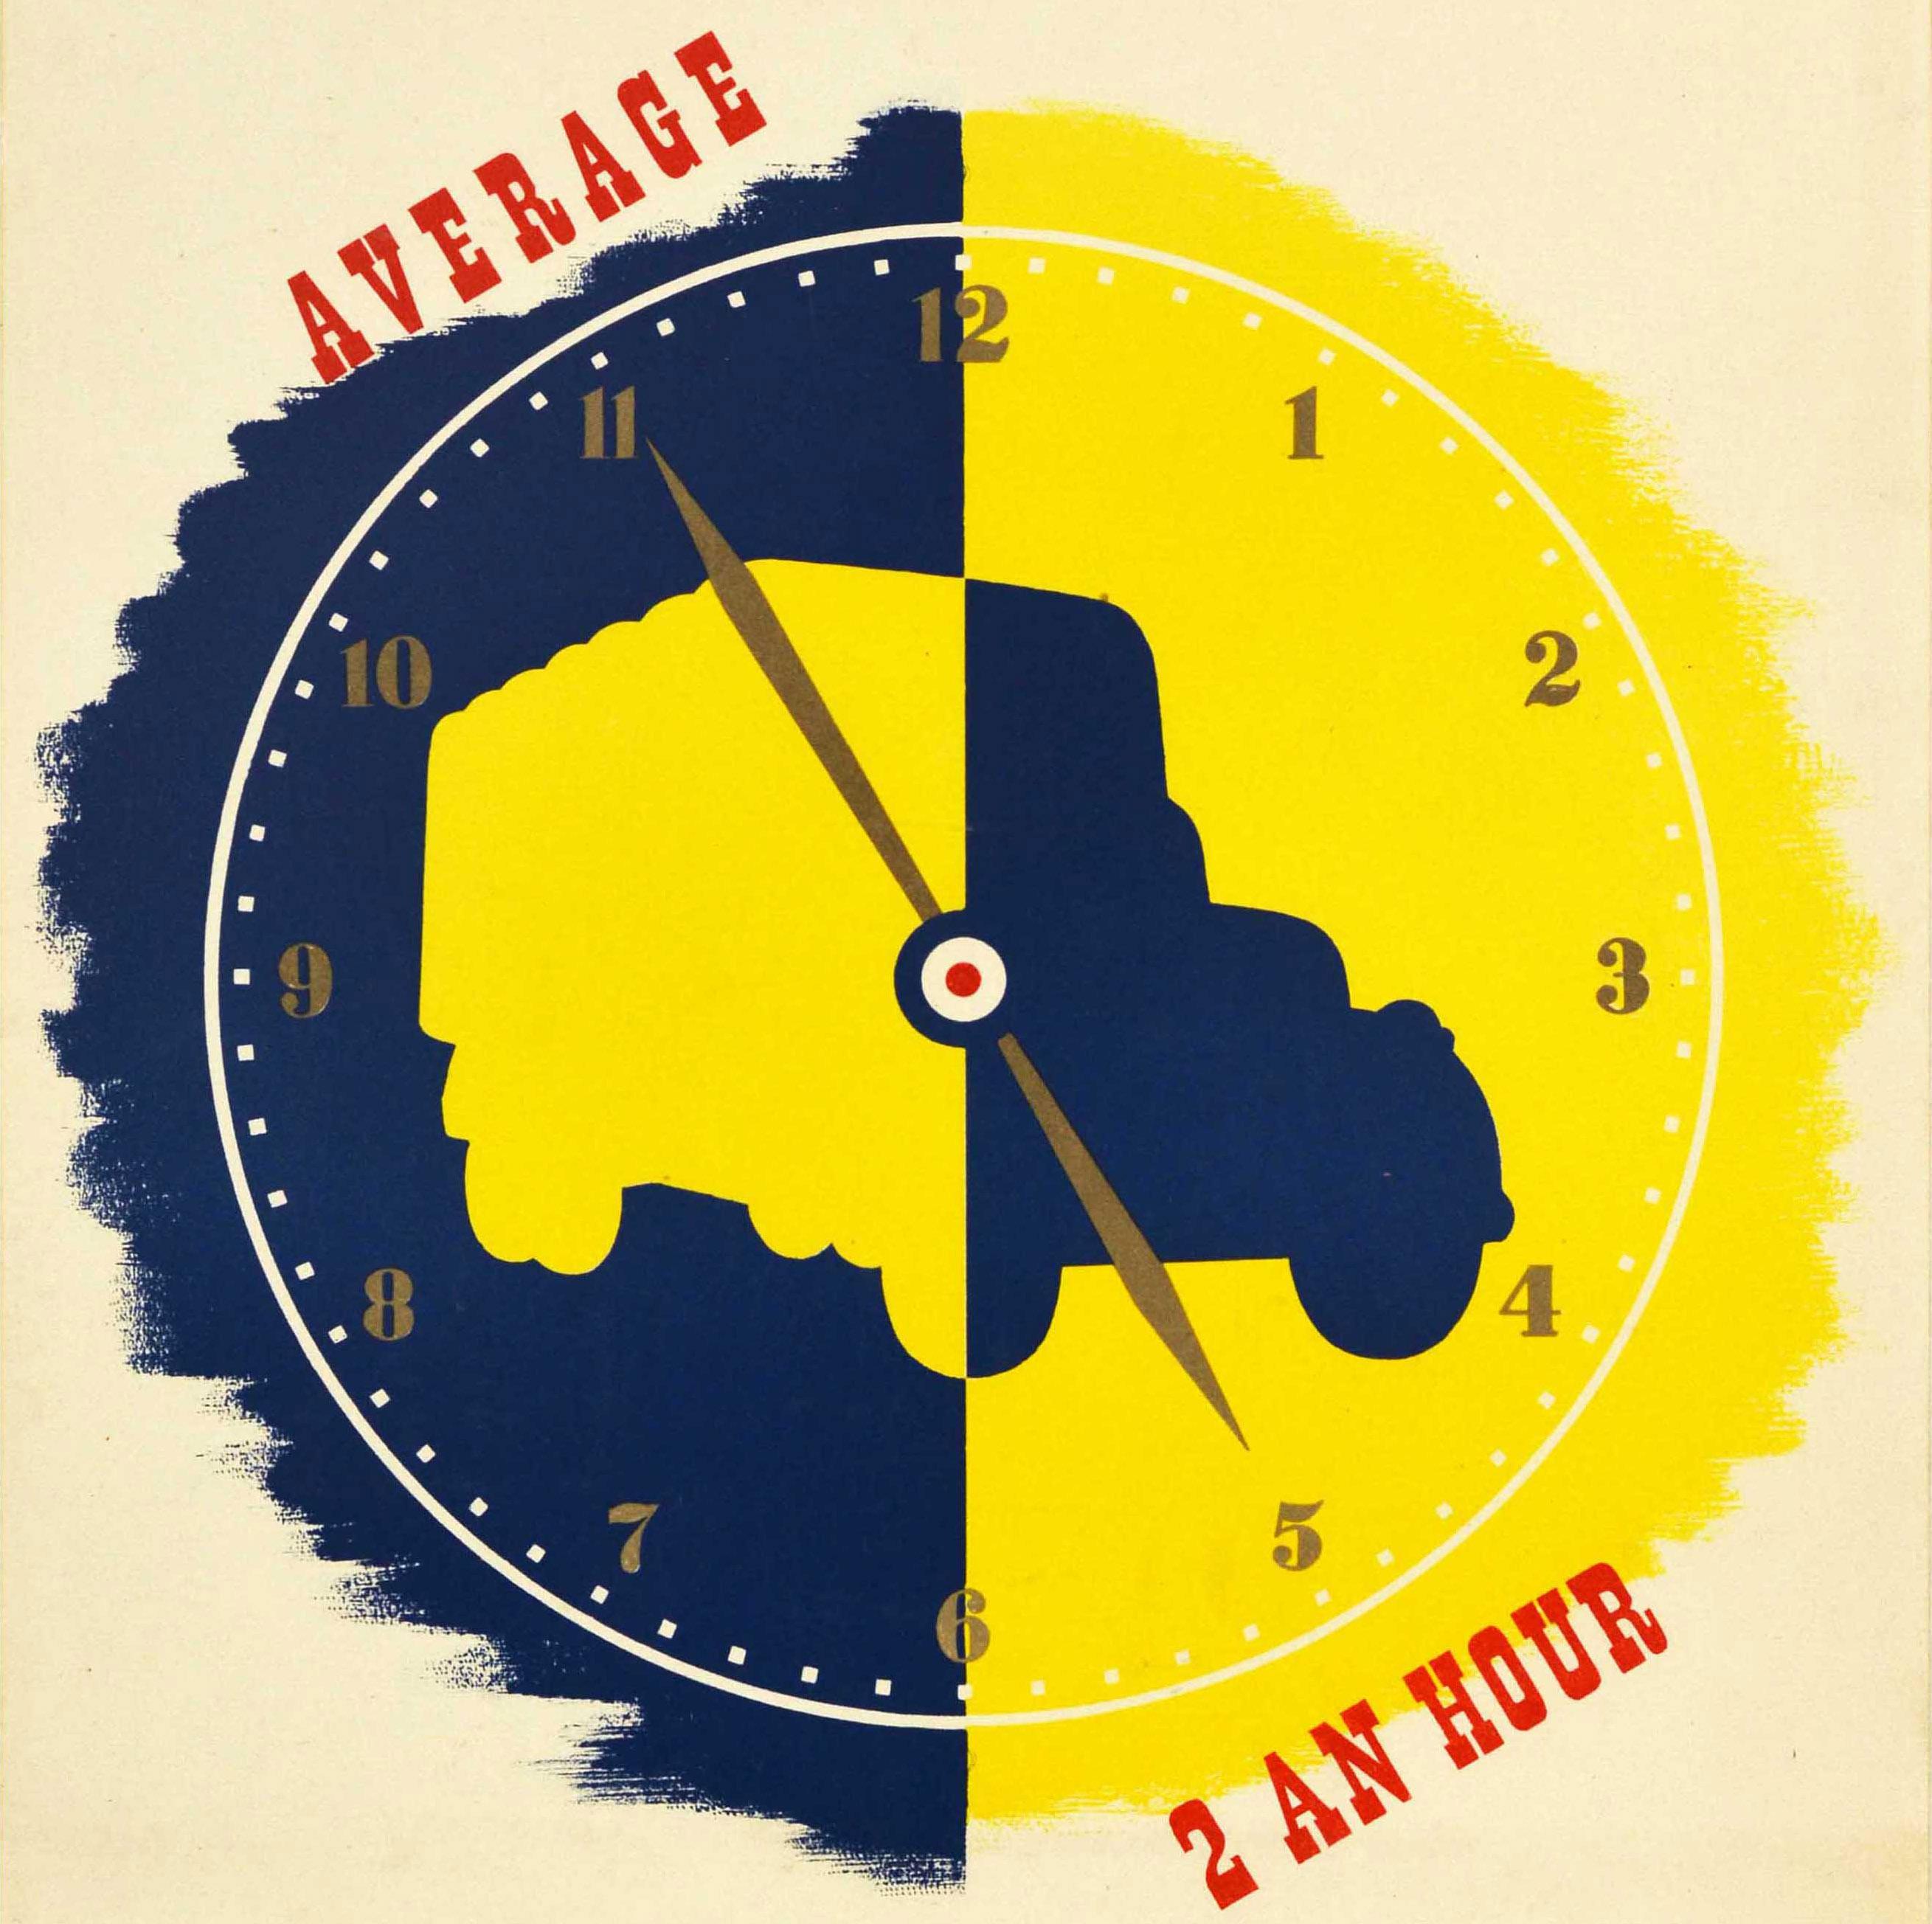 Original vintage road safety poster - Road Accidents in the Royal Air Force average 2 an hour That's two too many! - featuring a great graphic design depicting a clock face on a yellow and blue shaded background with an image of a military truck